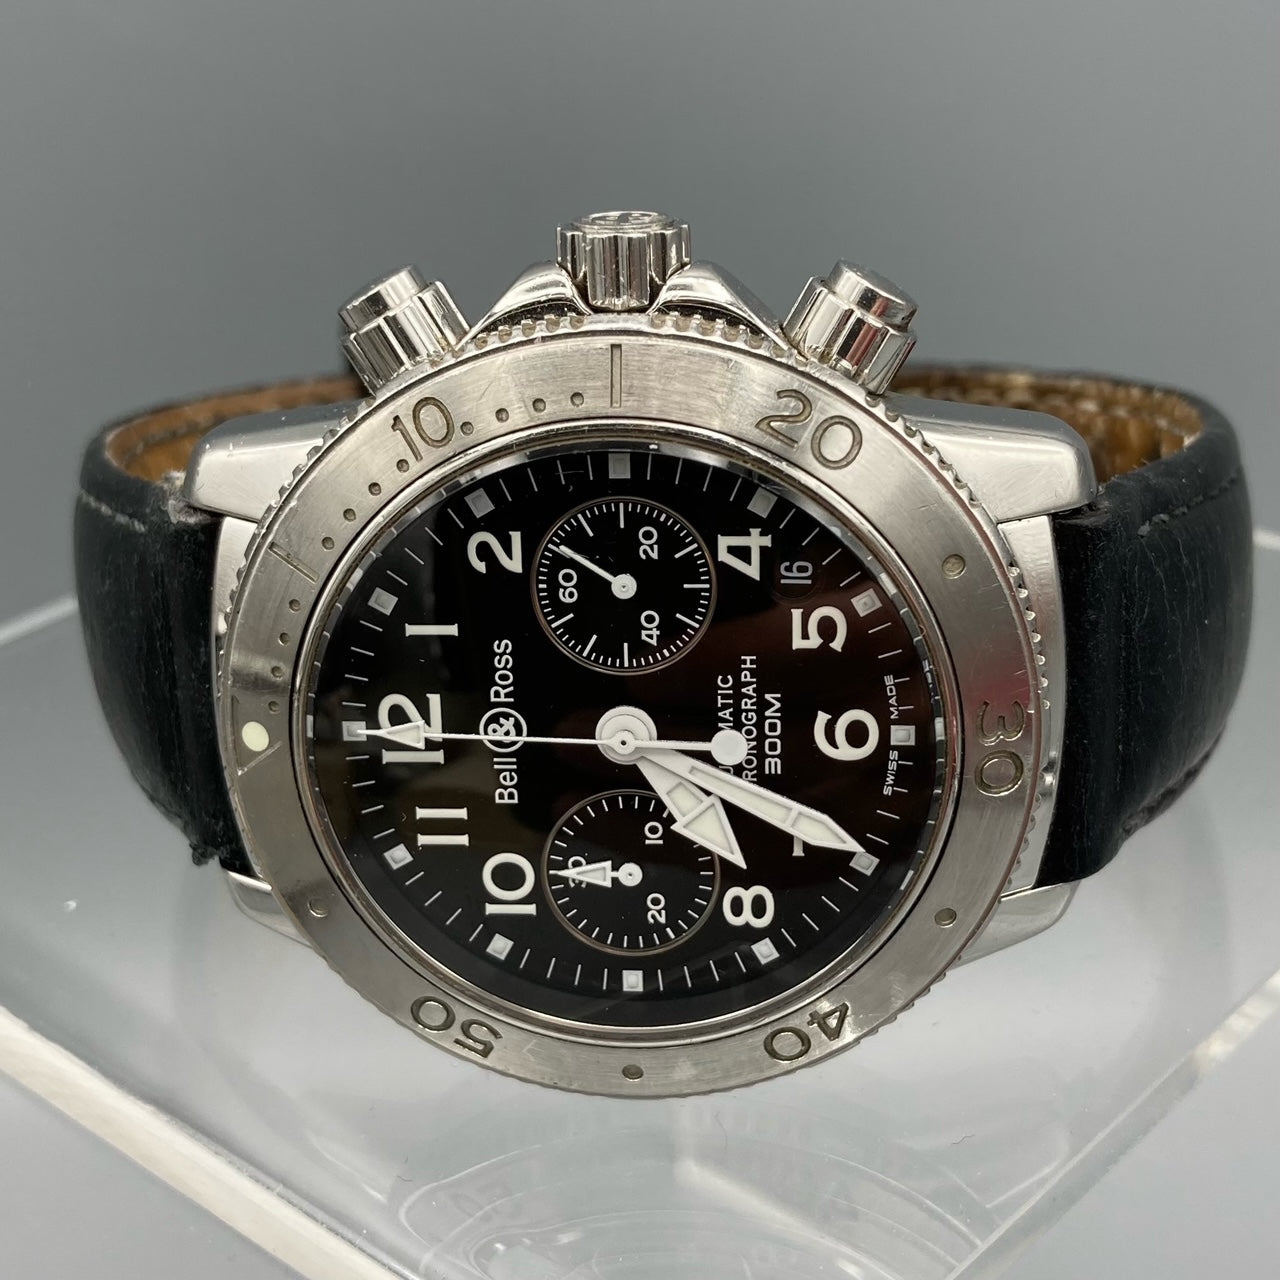 Bell & Ross Chronograph Black Dial 500S Watch - Diver 300